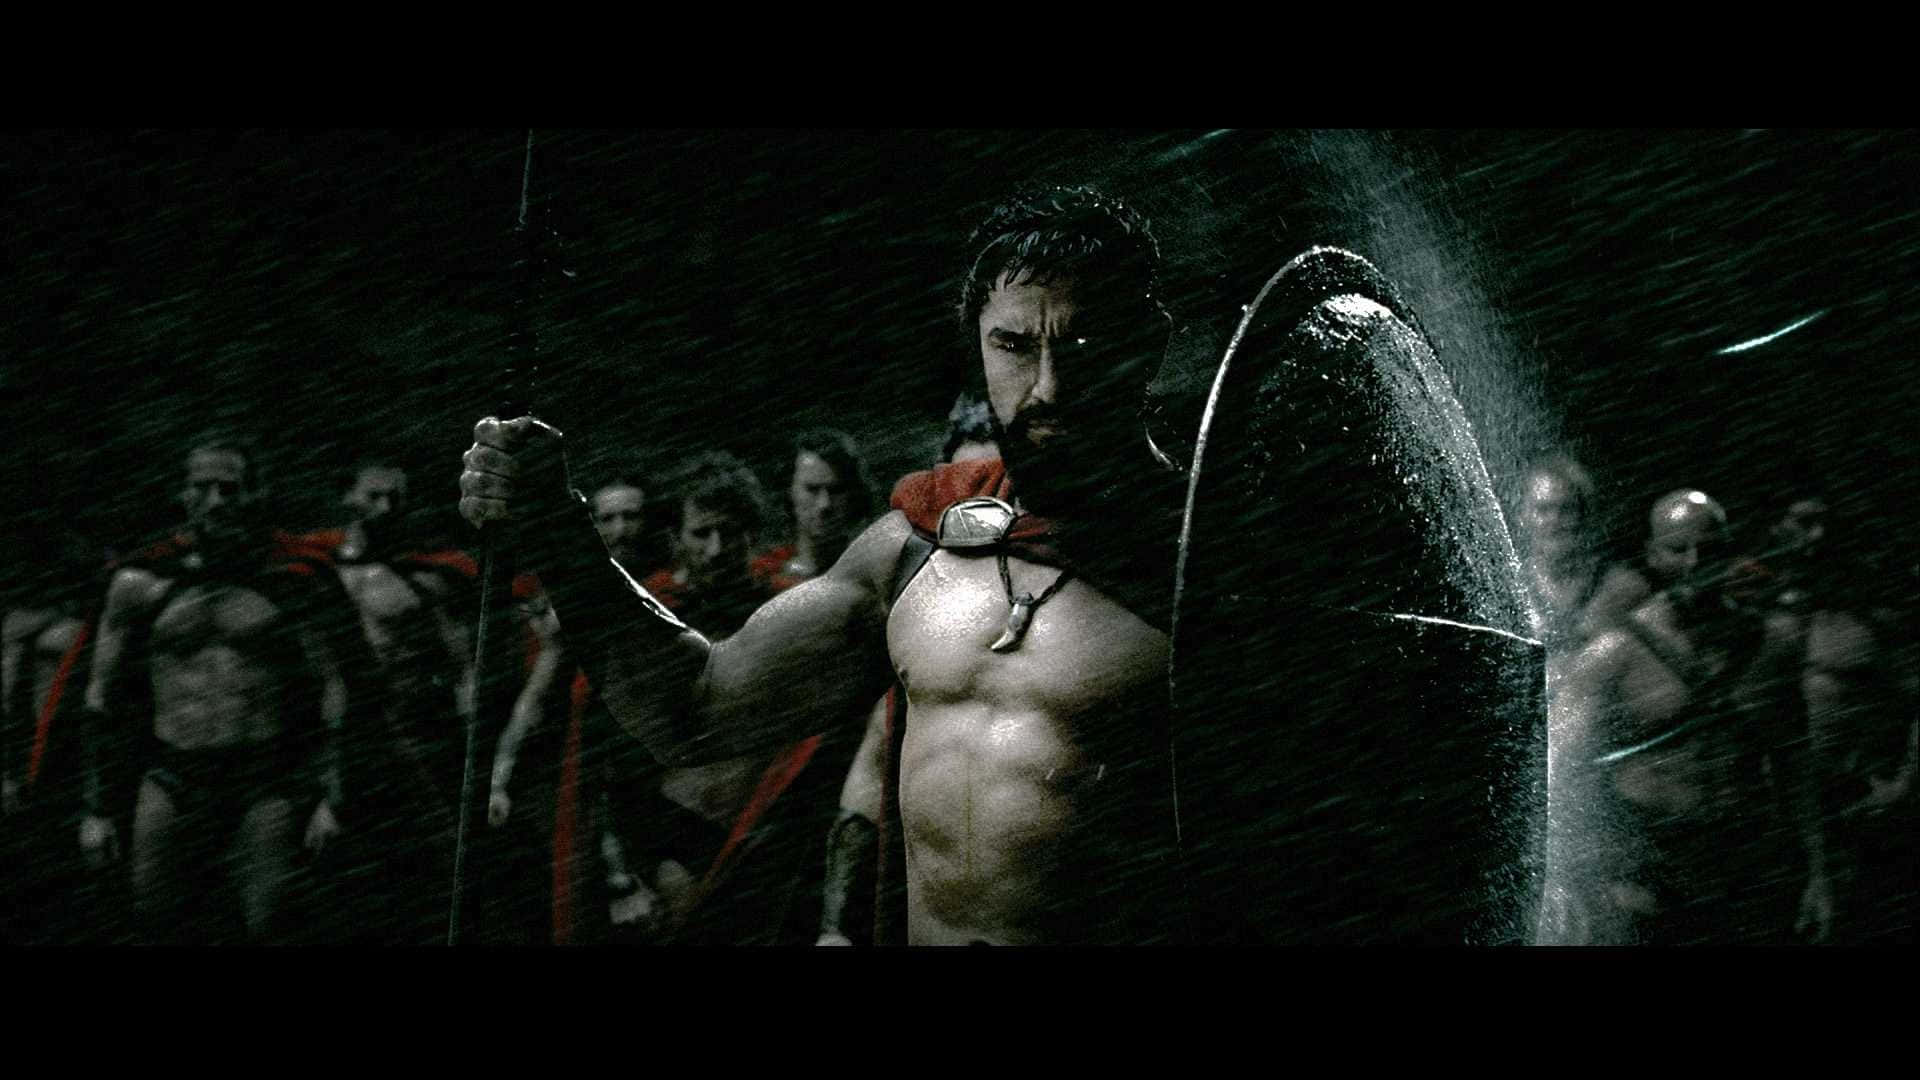 A Man In A Spartan Outfit Standing In The Rain Wallpaper